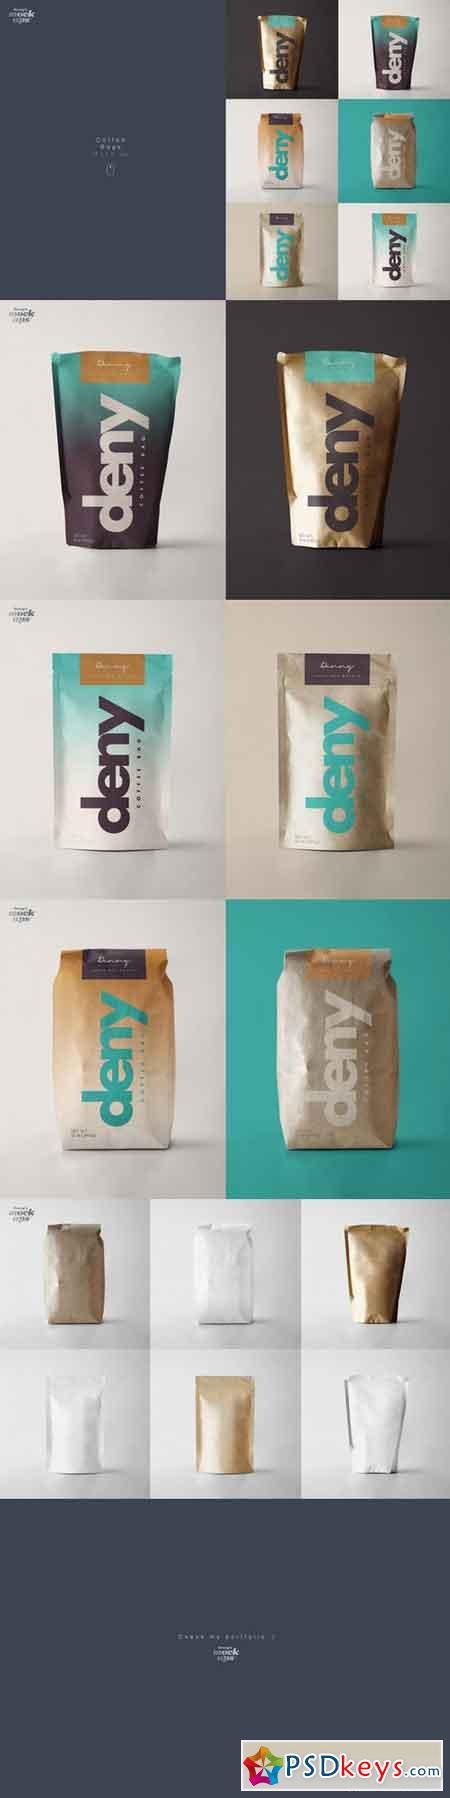 Download Coffee Bag 3 Types Mockup 669554 » Free Download Photoshop ...